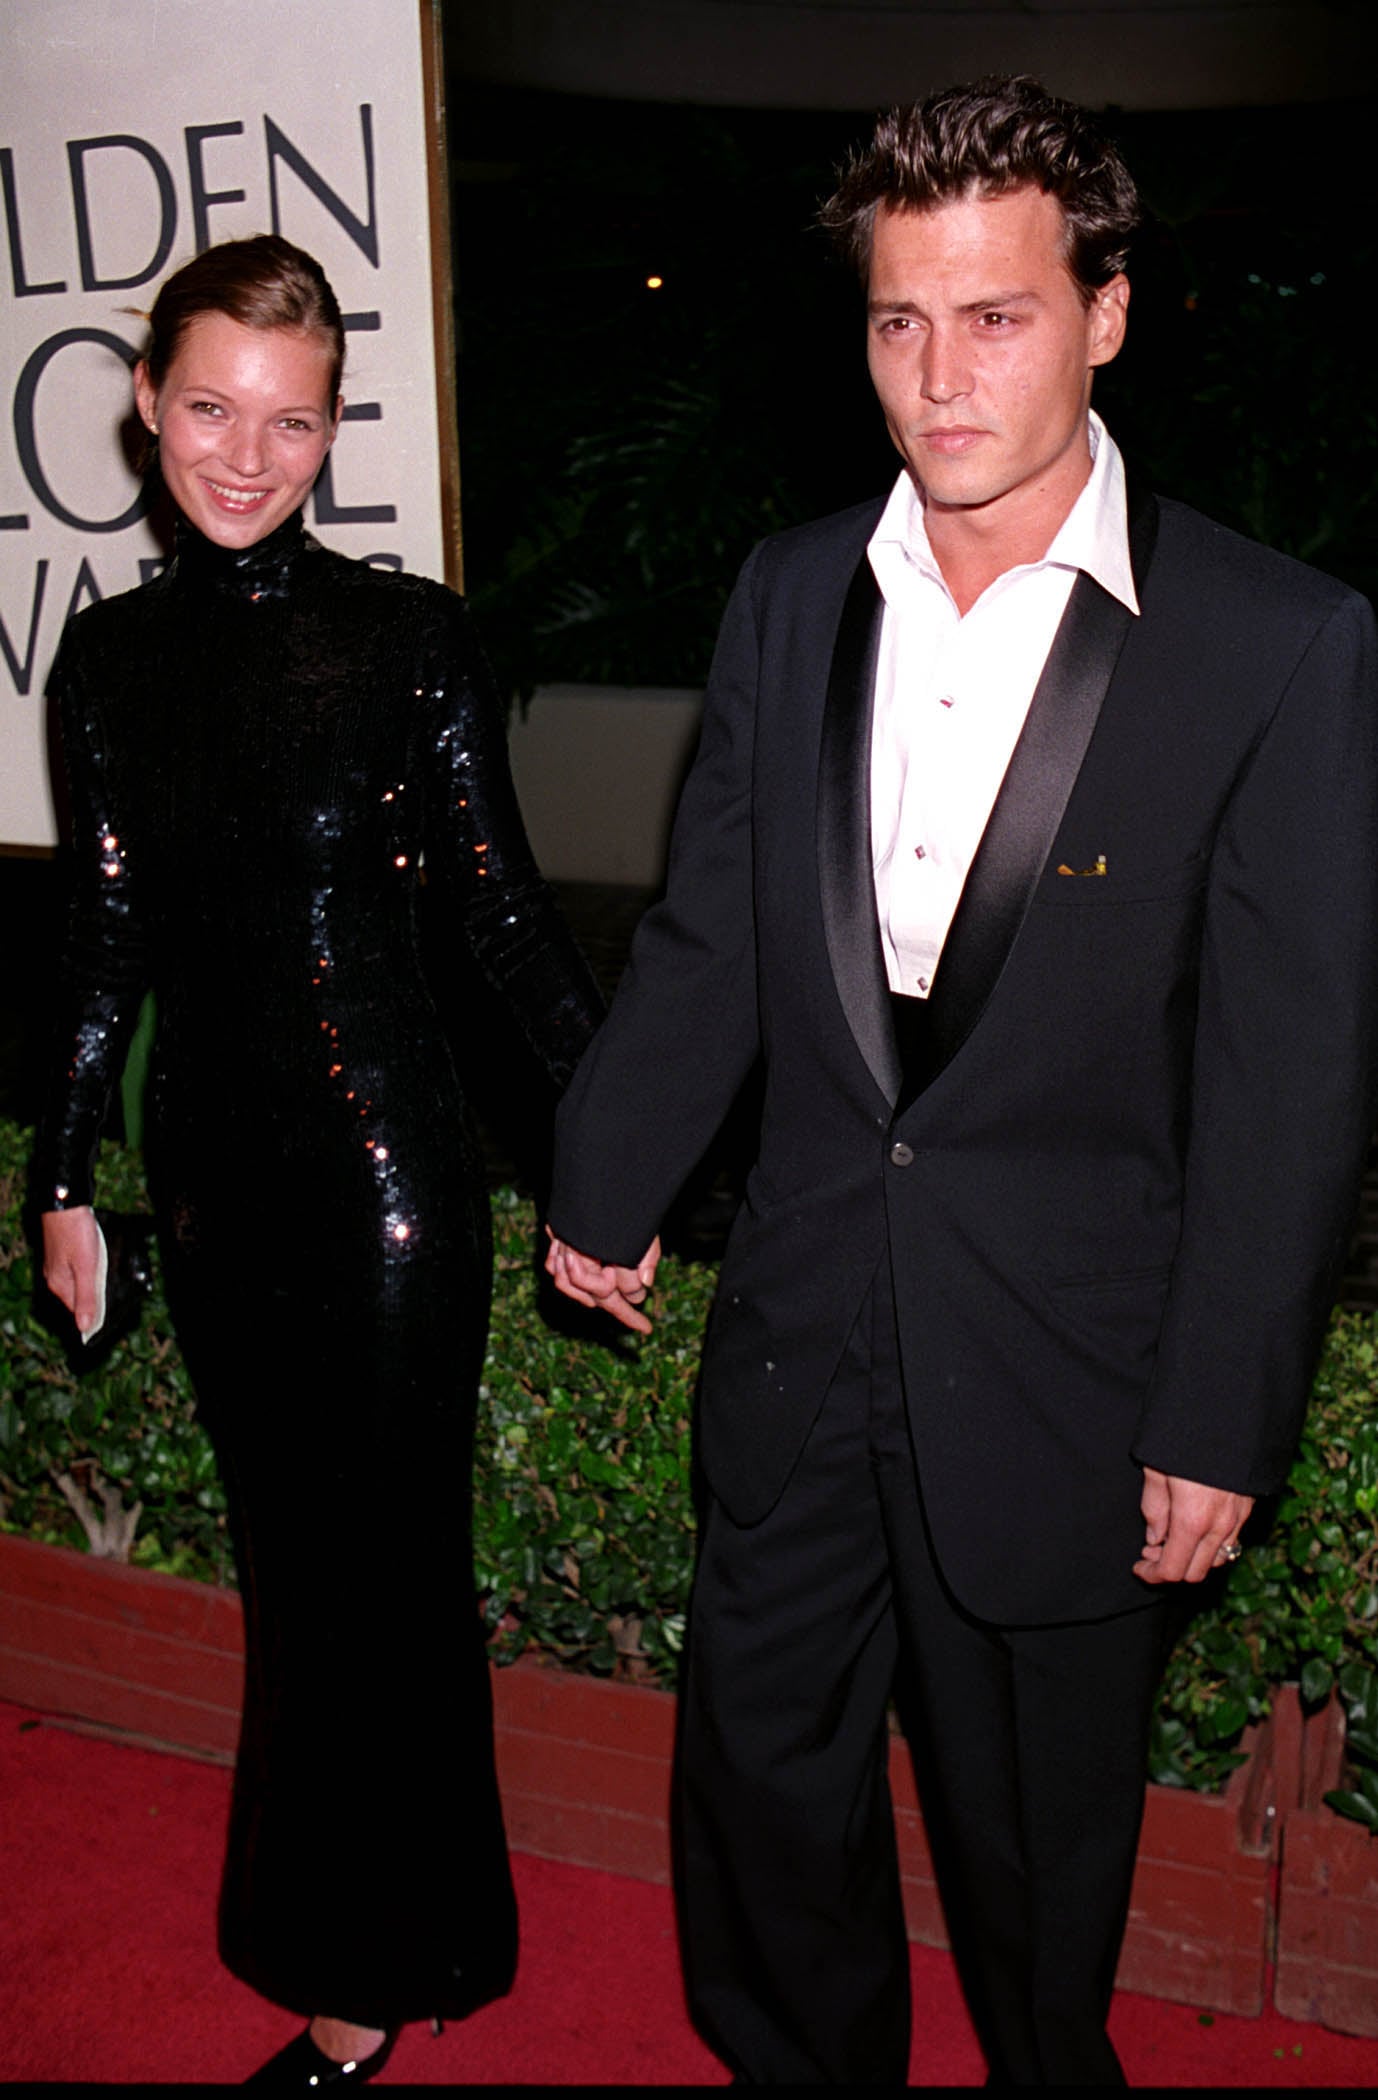 Even in the early days, Kate knew how dramatic an all-black look can be, opting for all-over sequins for the 1995 Golden Globe Awards. Of course, she had the best accessory to finish the look. Johnny Depp makes everything look better!